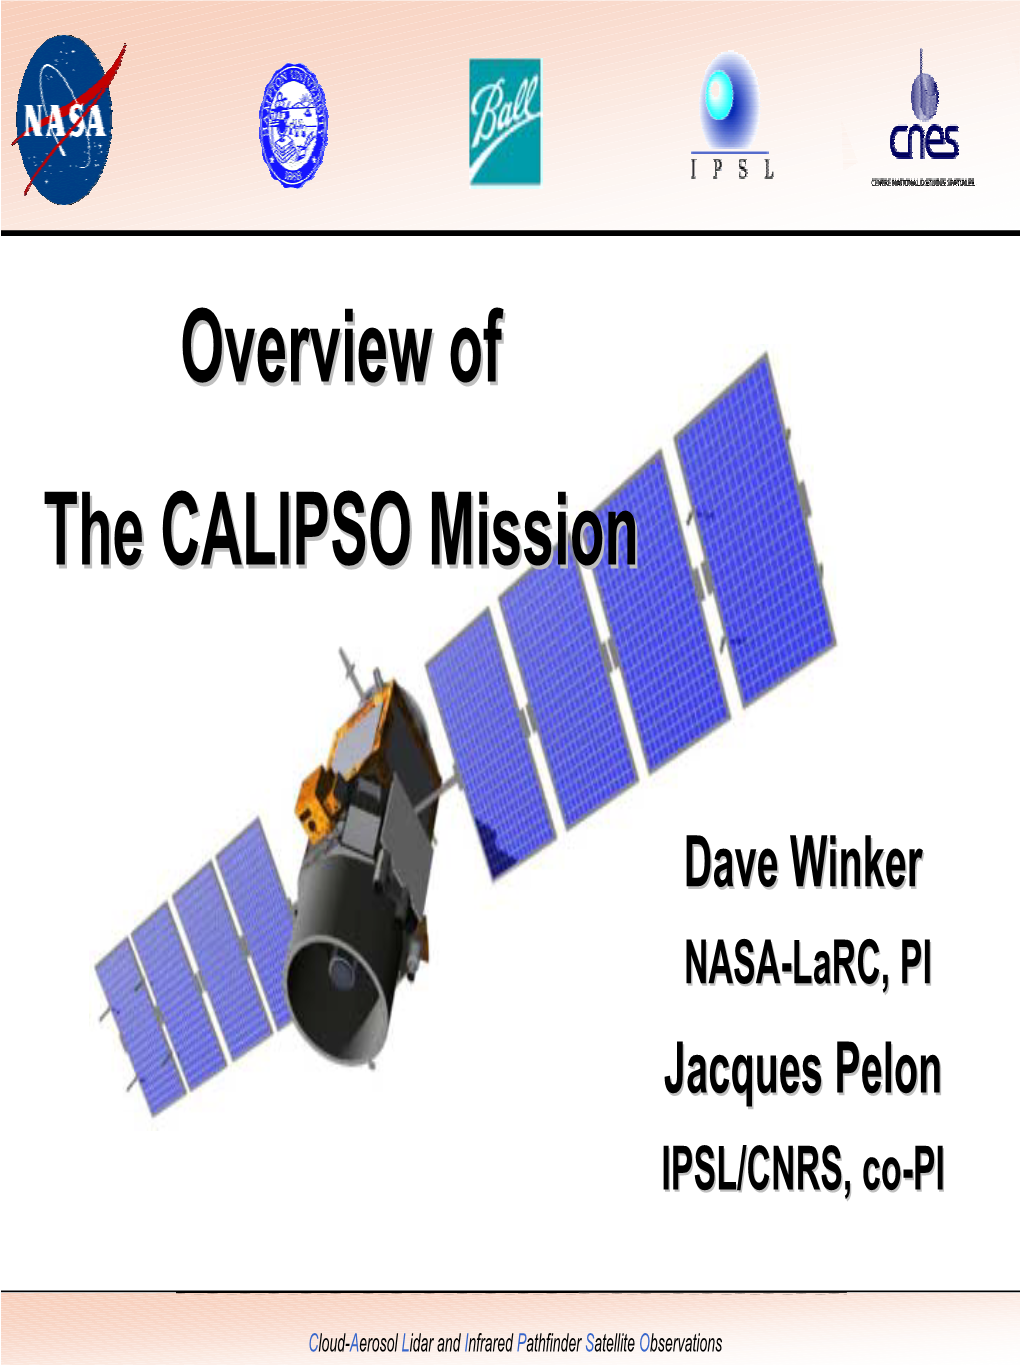 Overview of the CALIPSO Mission